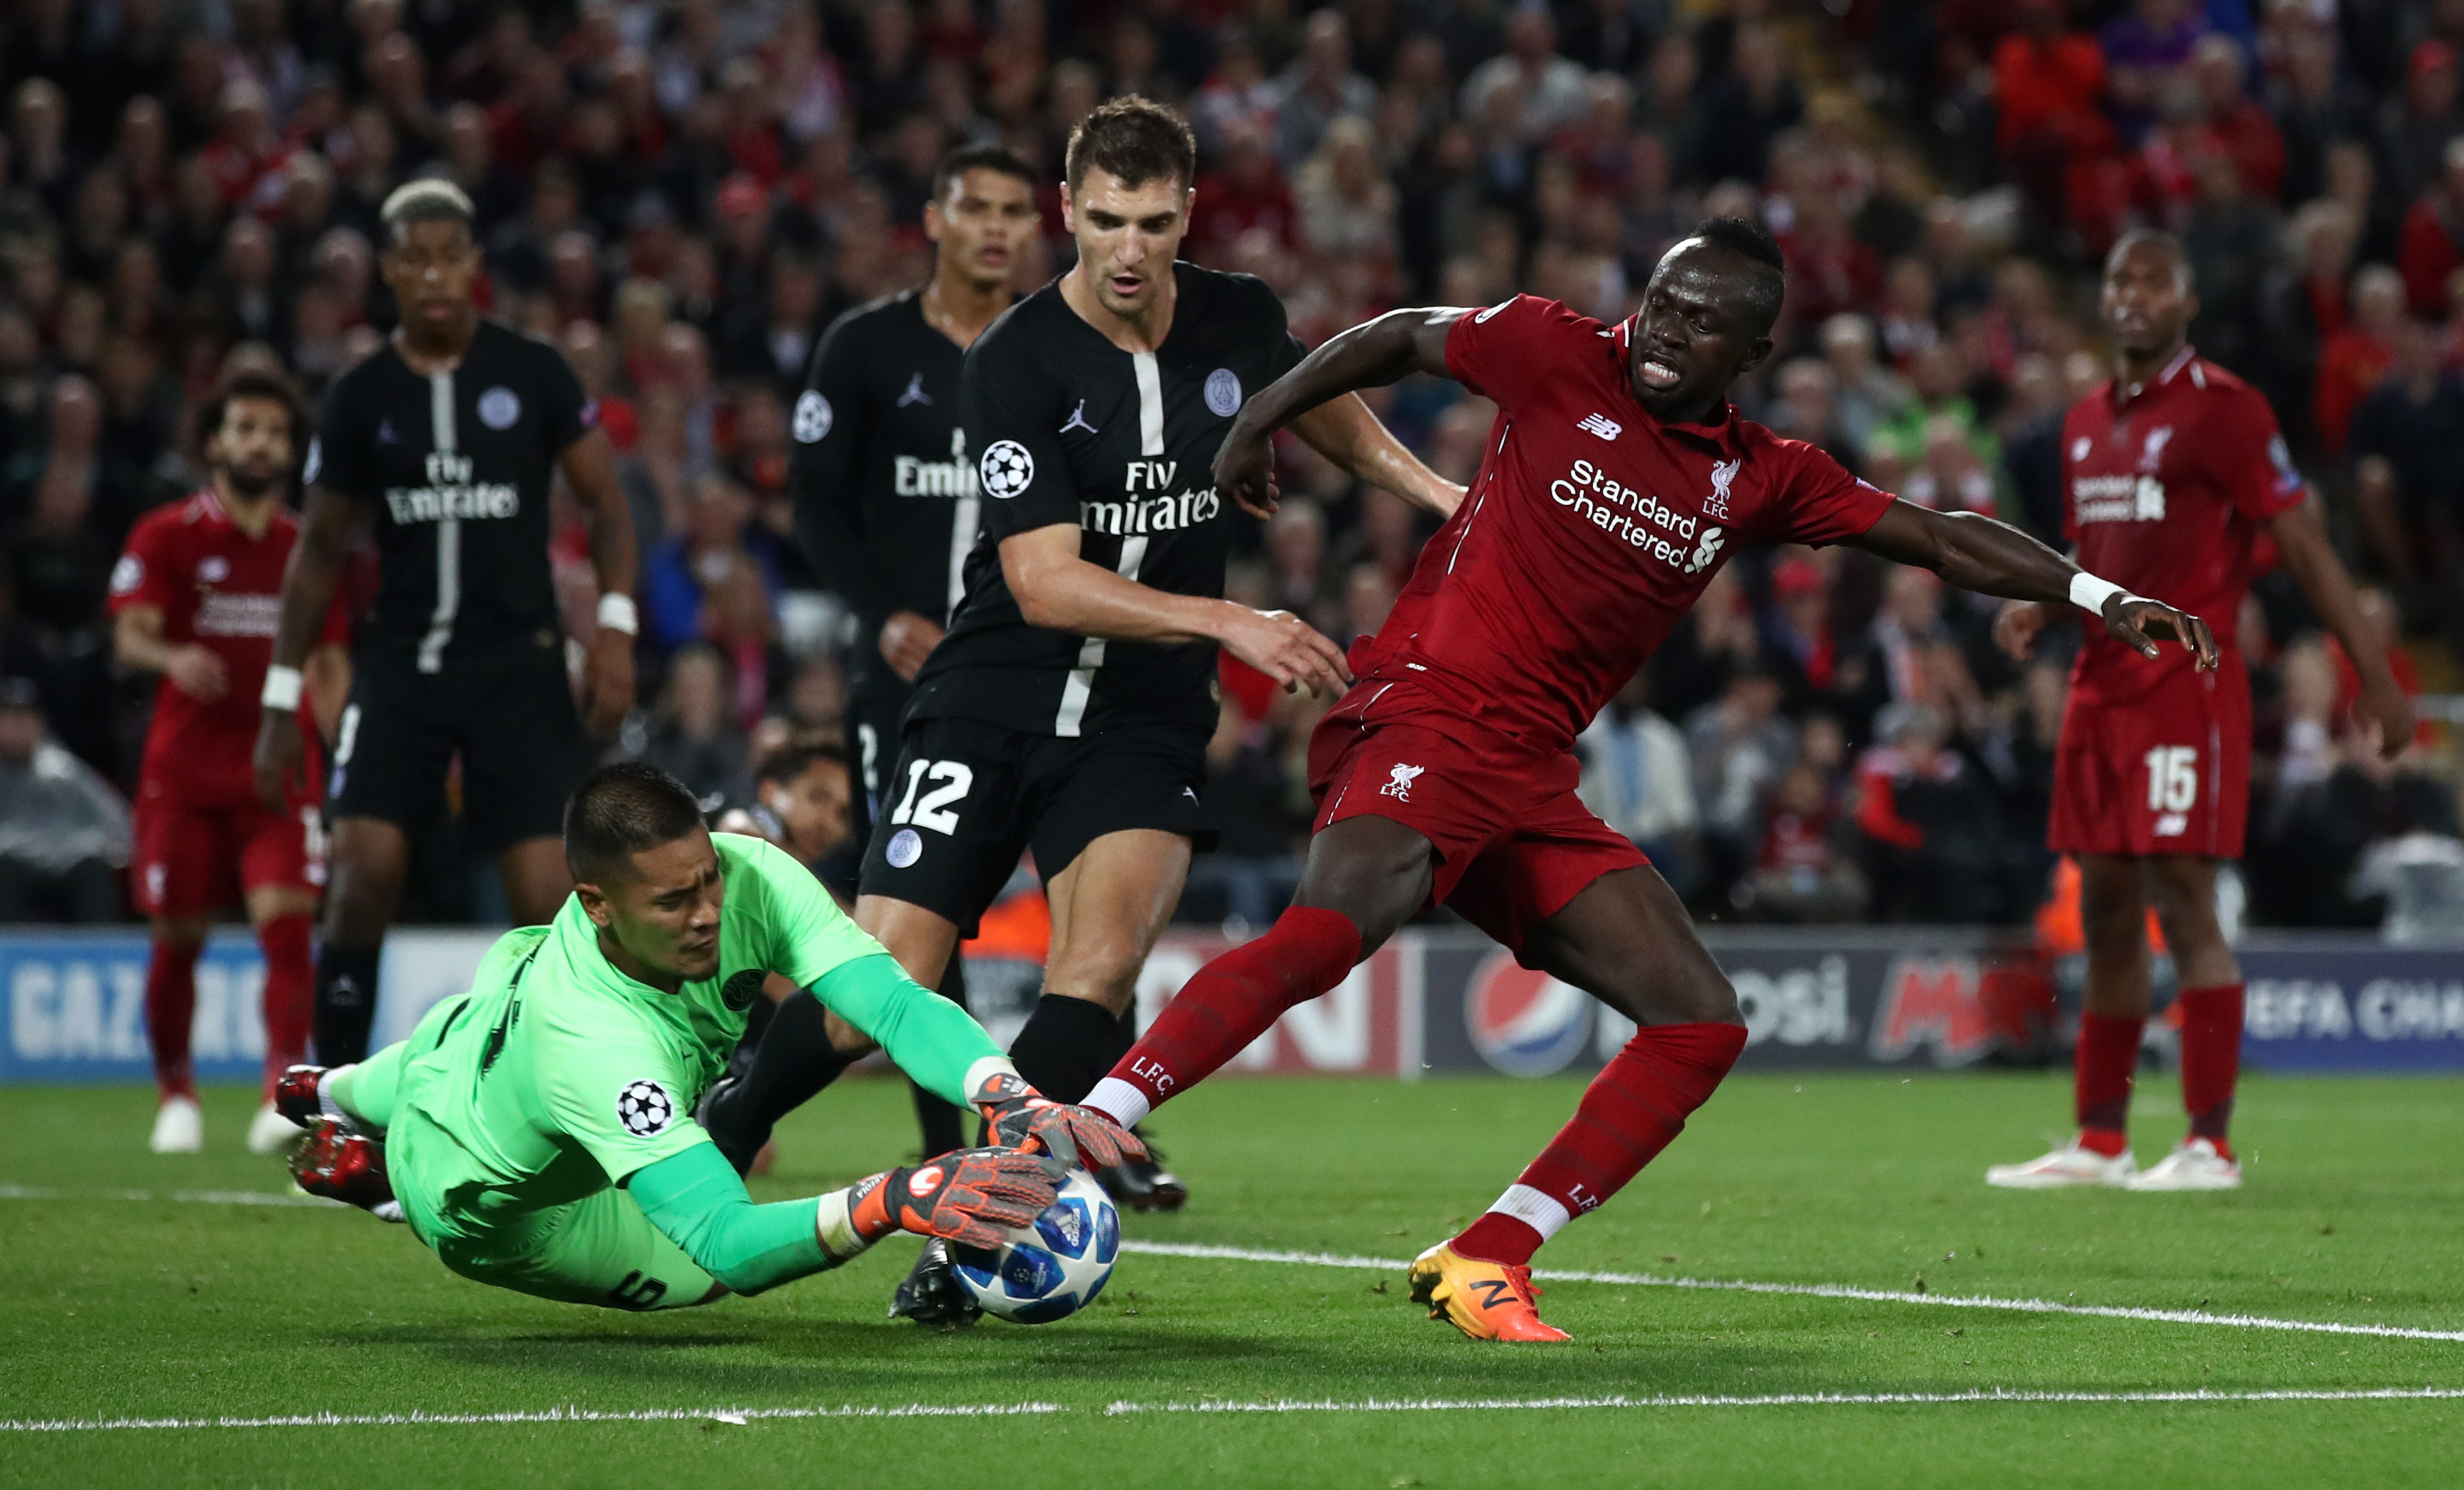 LIVERPOOL, ENGLAND - SEPTEMBER 18:  Alphonse Areola of Paris Saint-Germain collects the ball under pressure from Sadio Mane of Liverpool during the Group C match of the UEFA Champions League between Liverpool and Paris Saint-Germain at Anfield on September 18, 2018 in Liverpool, United Kingdom.  (Photo by Julian Finney/Getty Images)